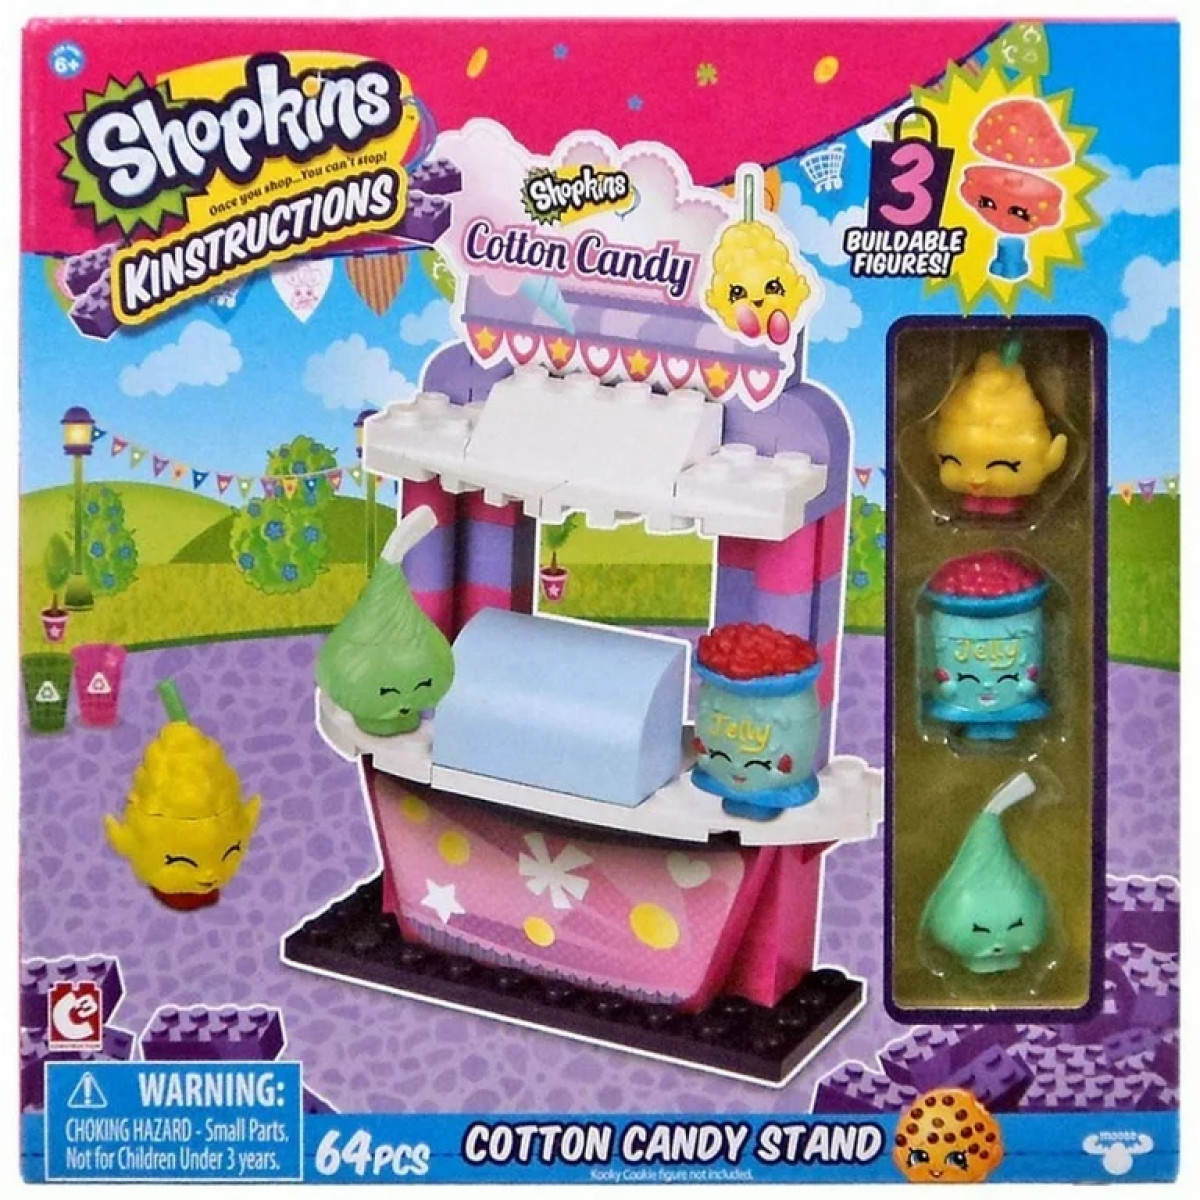 SHOPKINS K INSTRUCT COT CANDY 37402